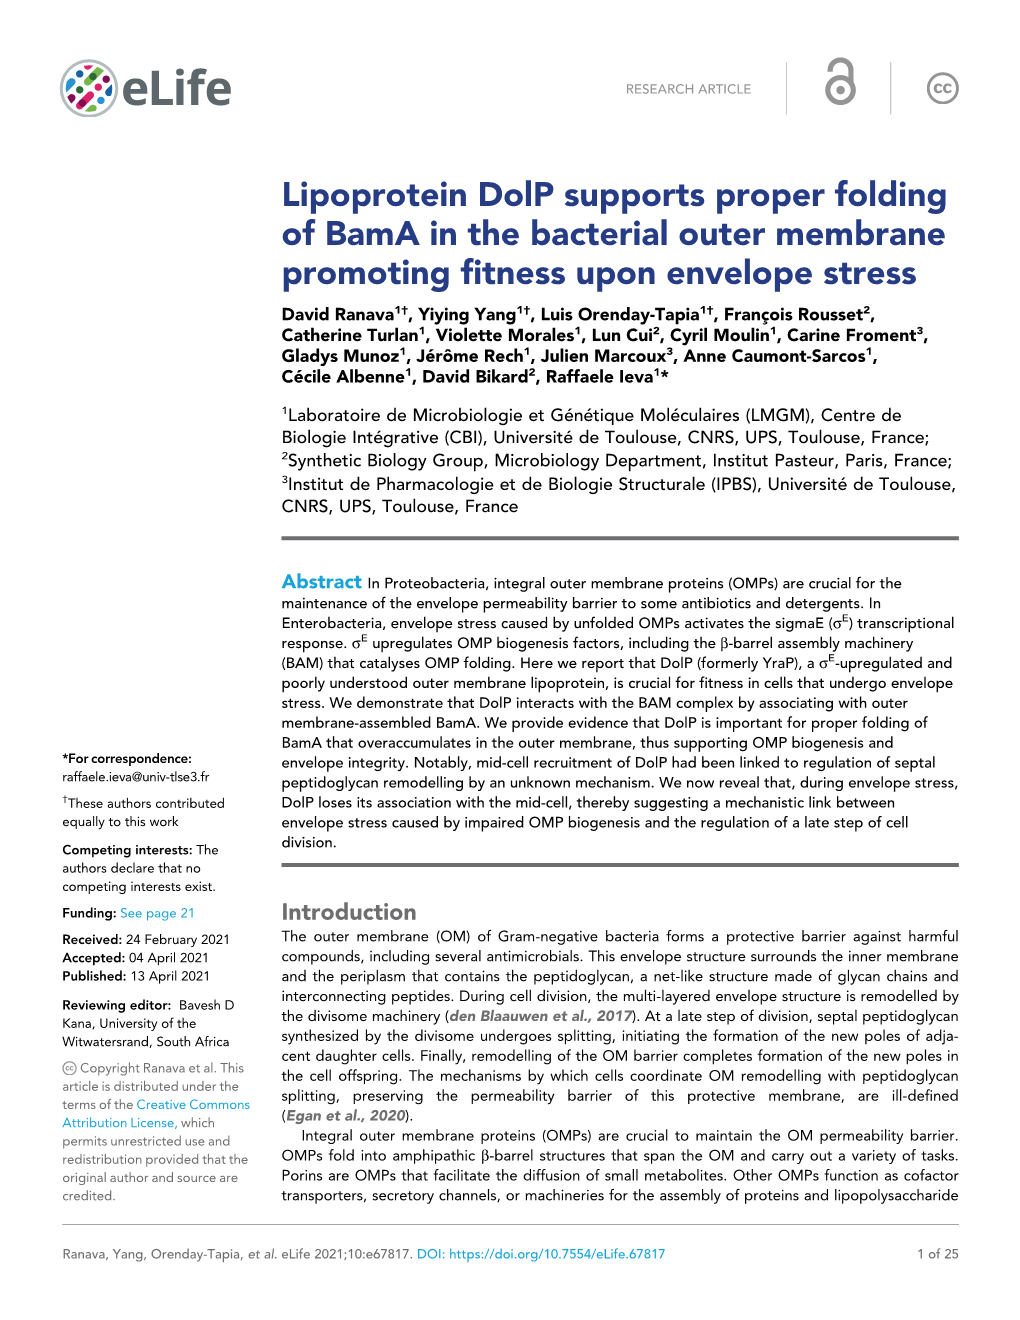 Lipoprotein Dolp Supports Proper Folding of Bama in the Bacterial